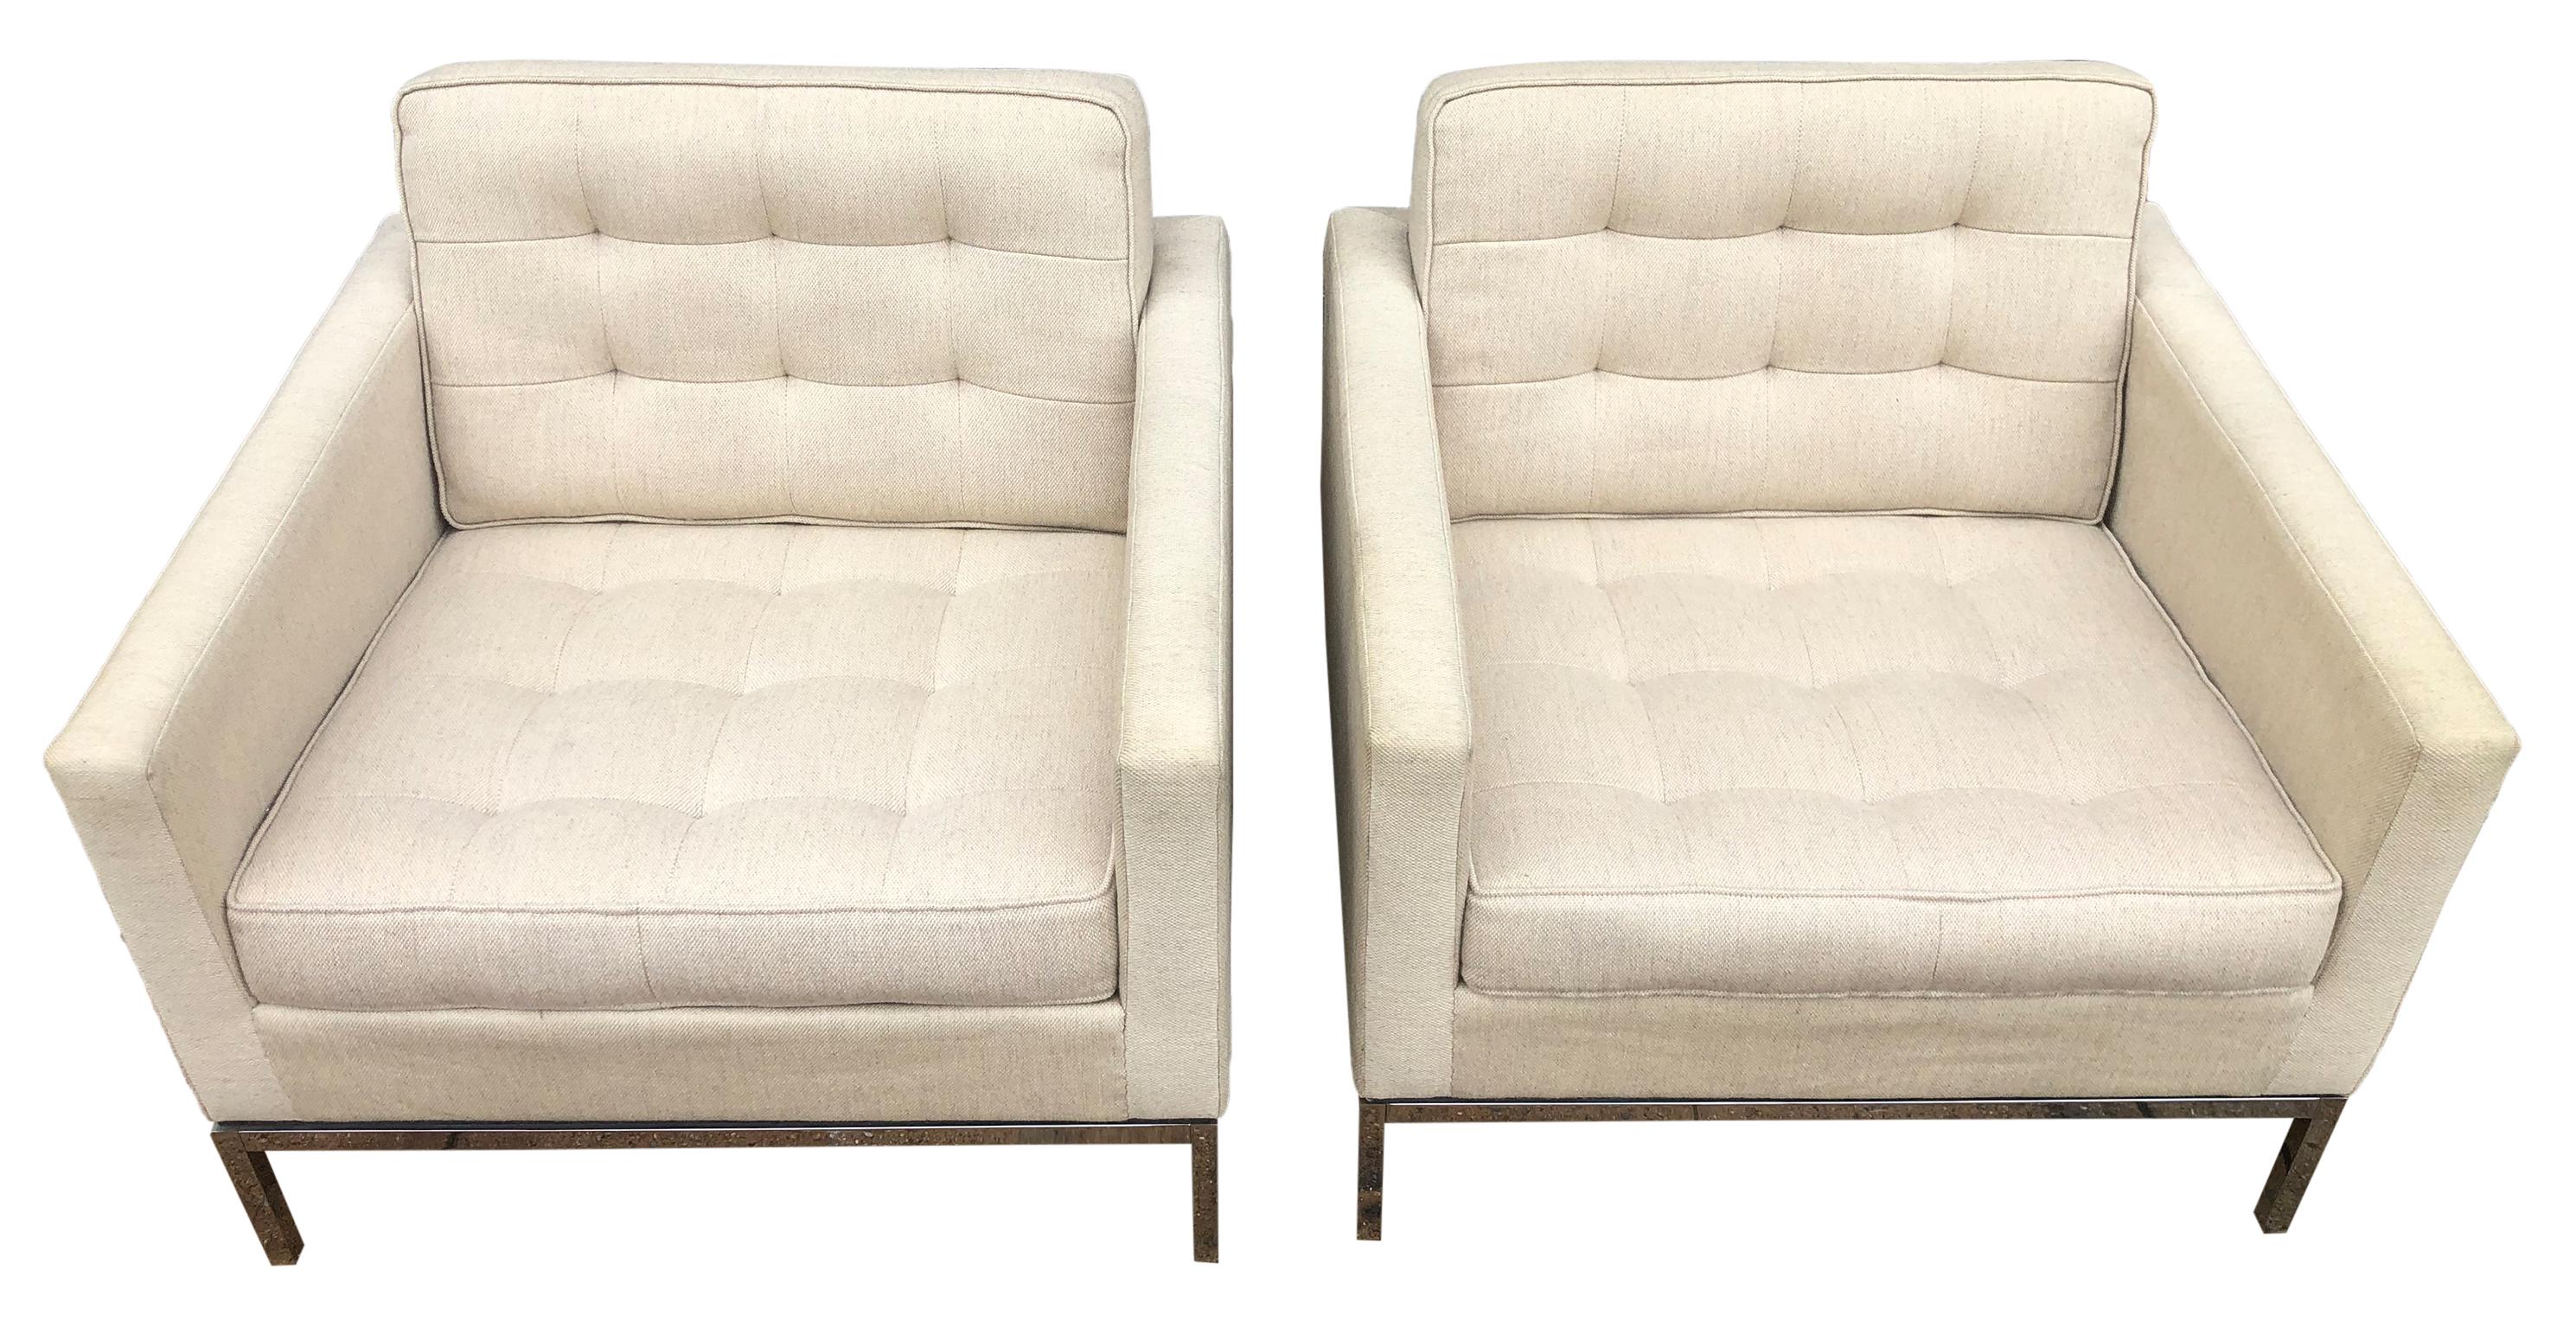 Vintage Pair of original club lounge chairs by Florence Knoll for Knoll International 655 Madison Ave. NYC. Classic great lines. The chrome bases are perfect with all original Knoll white/sand woven upholstery that is in great condition. Off-white